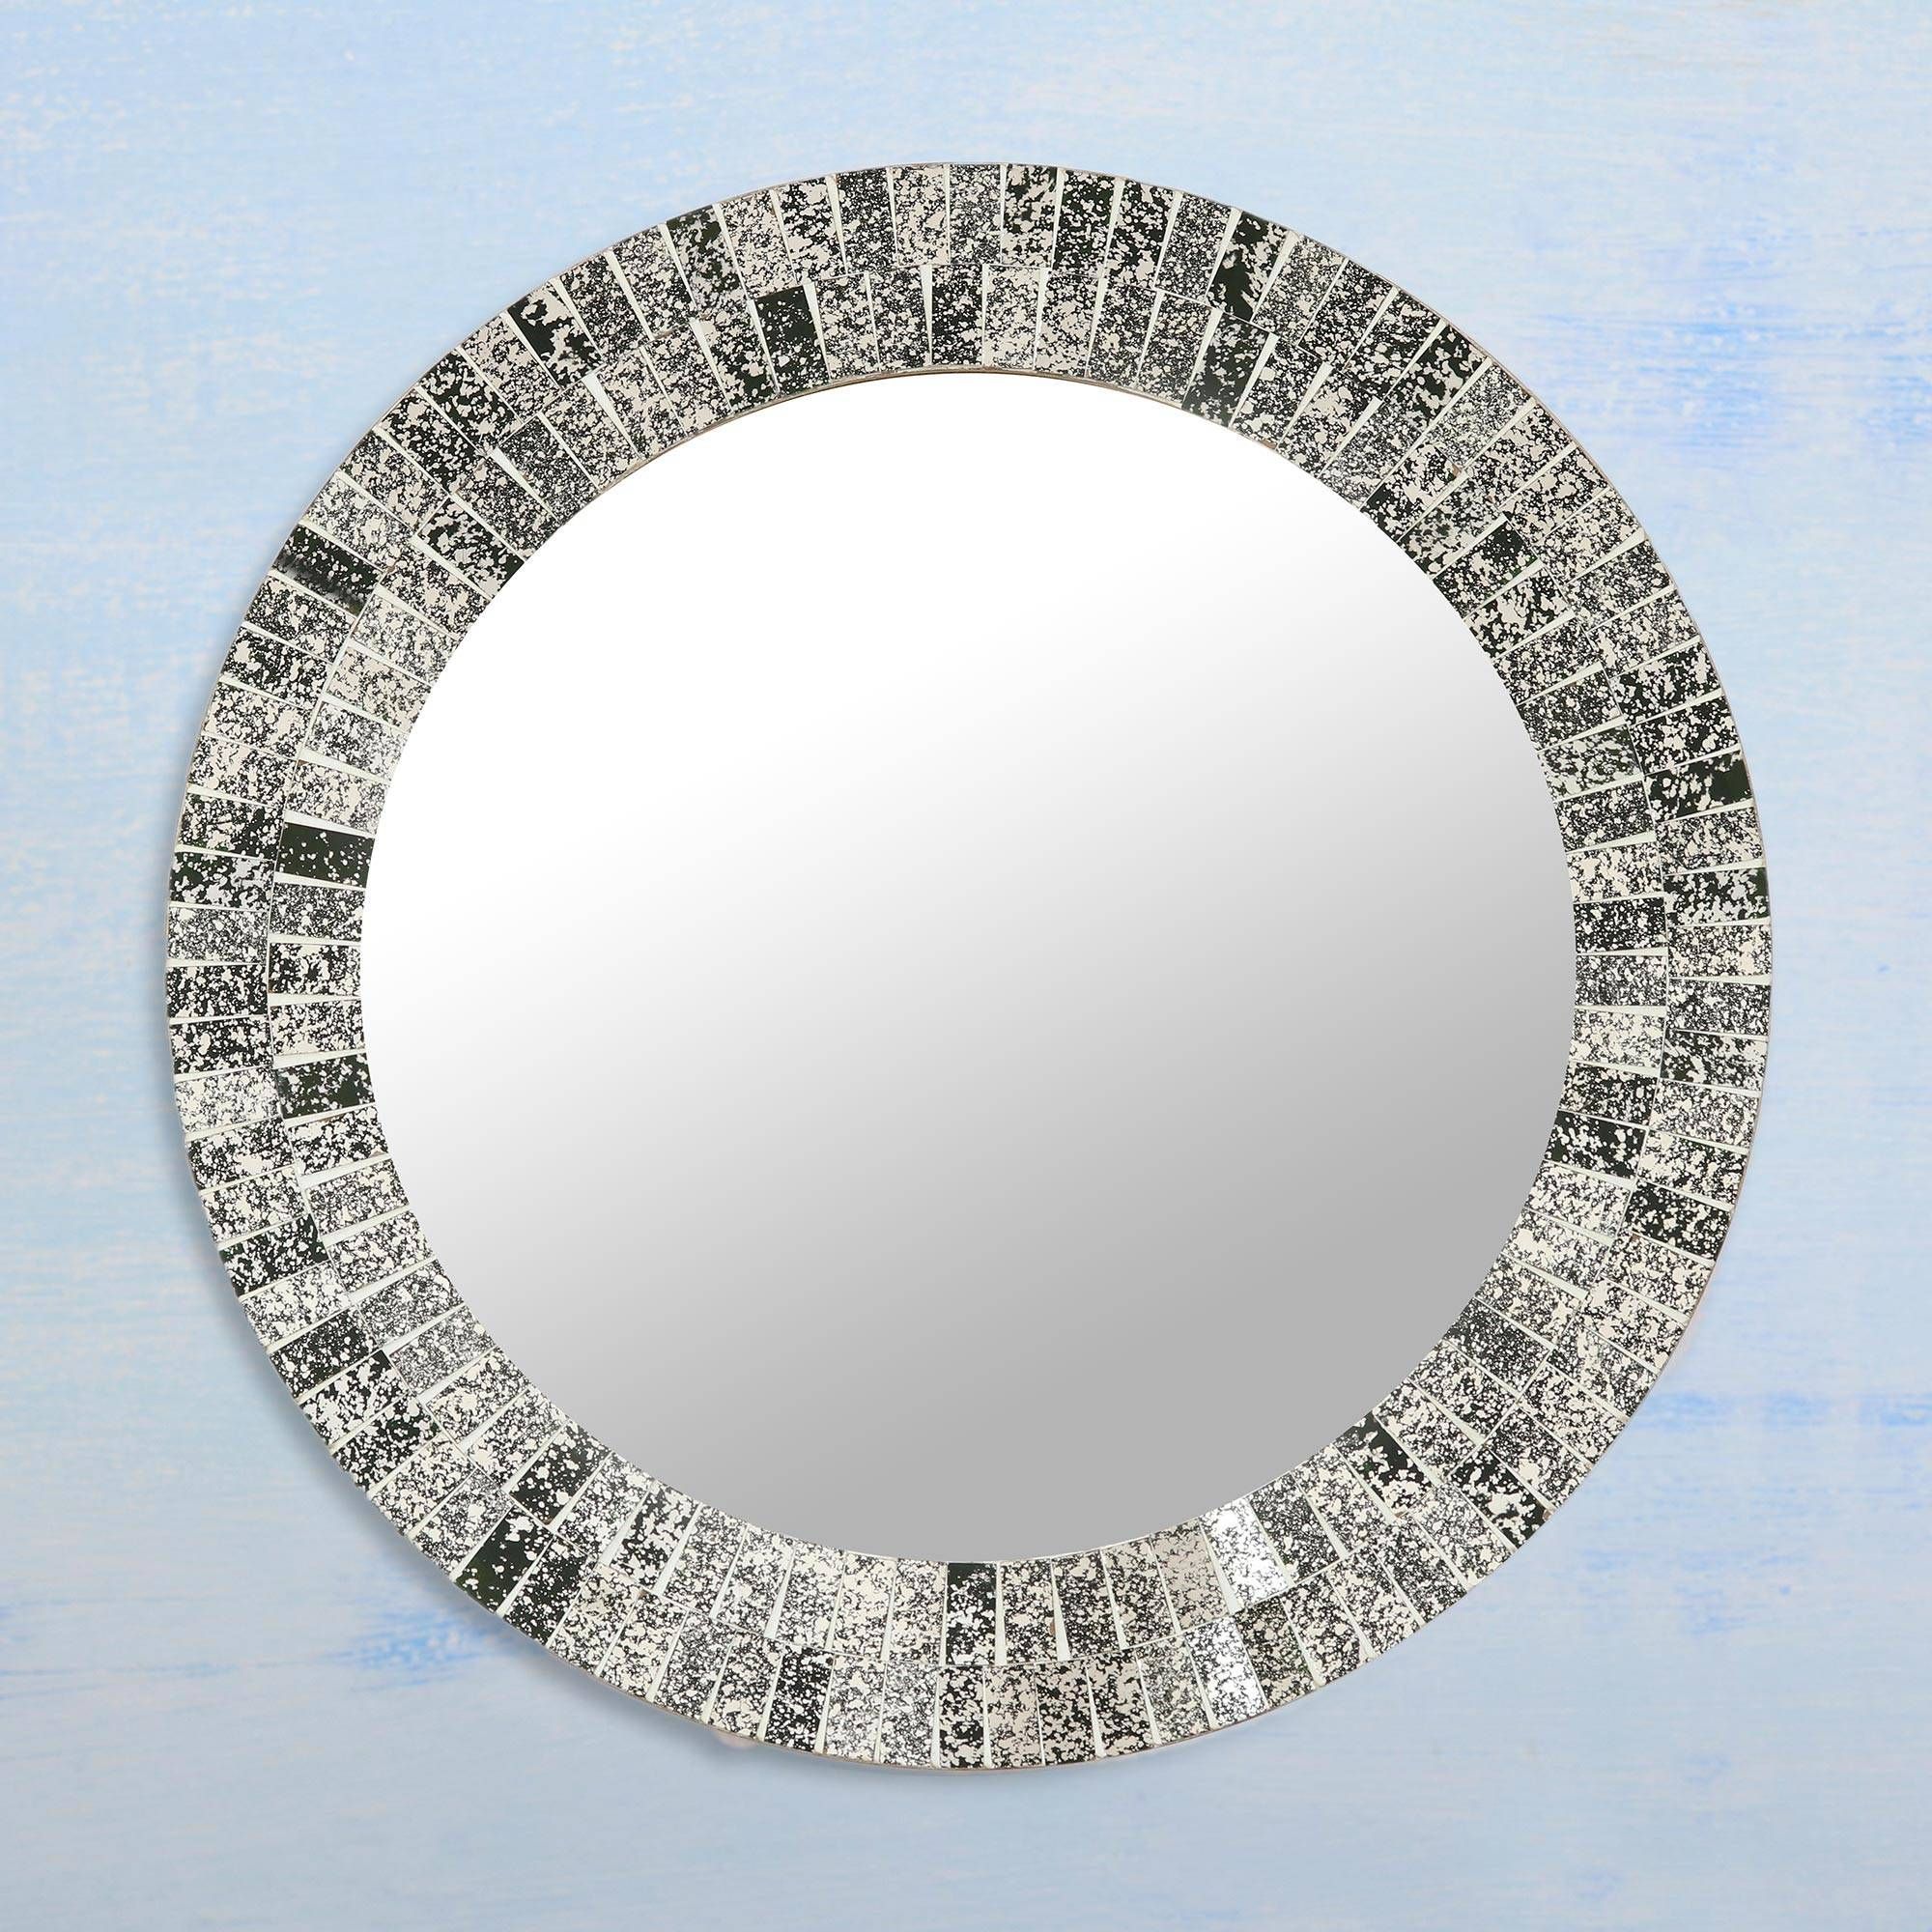 Hand Crafted Silver And Black Mosaic Tile Round Wall Mirror – Onyx Intended For Midnight Black Round Wall Mirrors (View 9 of 15)